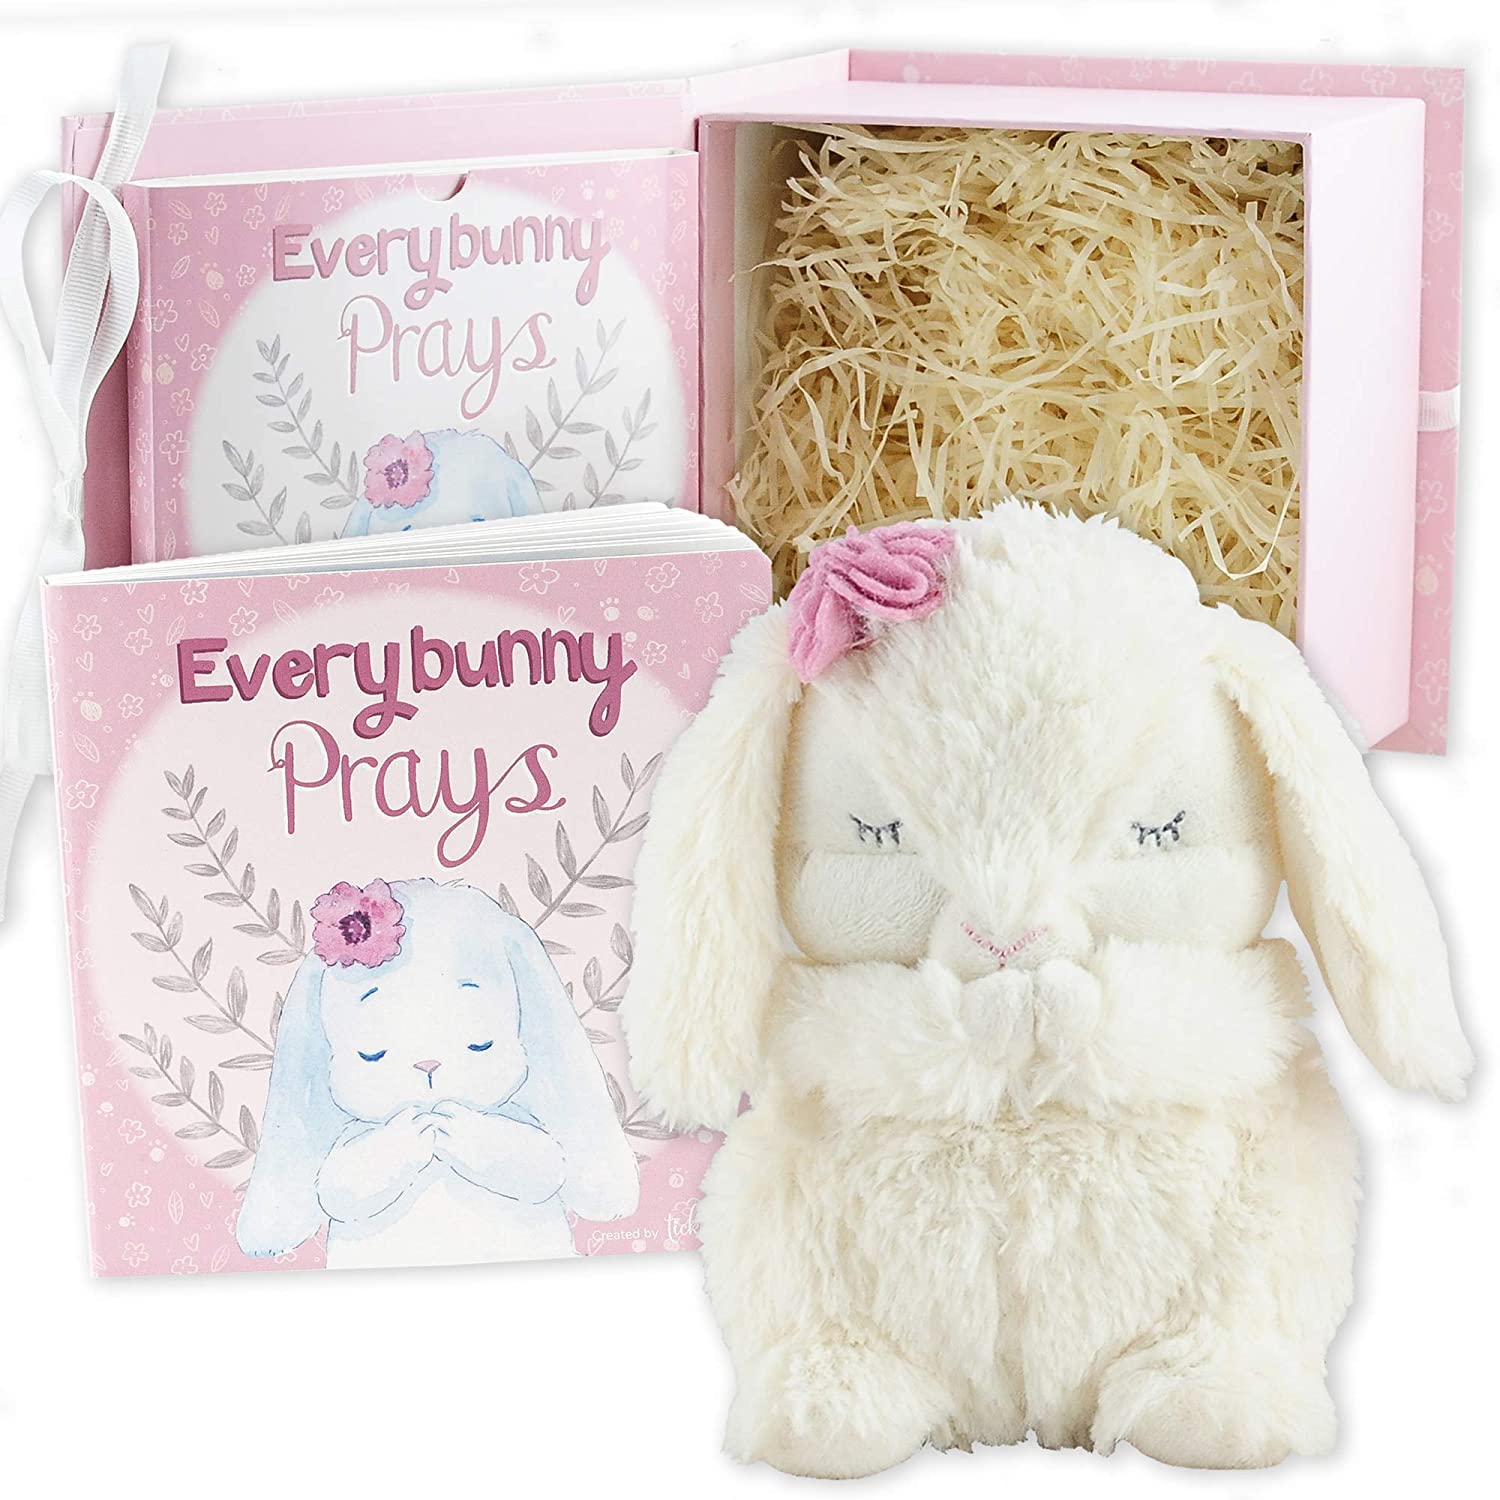 https://thepintopony.com/wp-content/uploads/2024/04/1712784702_373_Baby-Gift-Set-Charming-Faith-Based-Bunny-Review.jpg